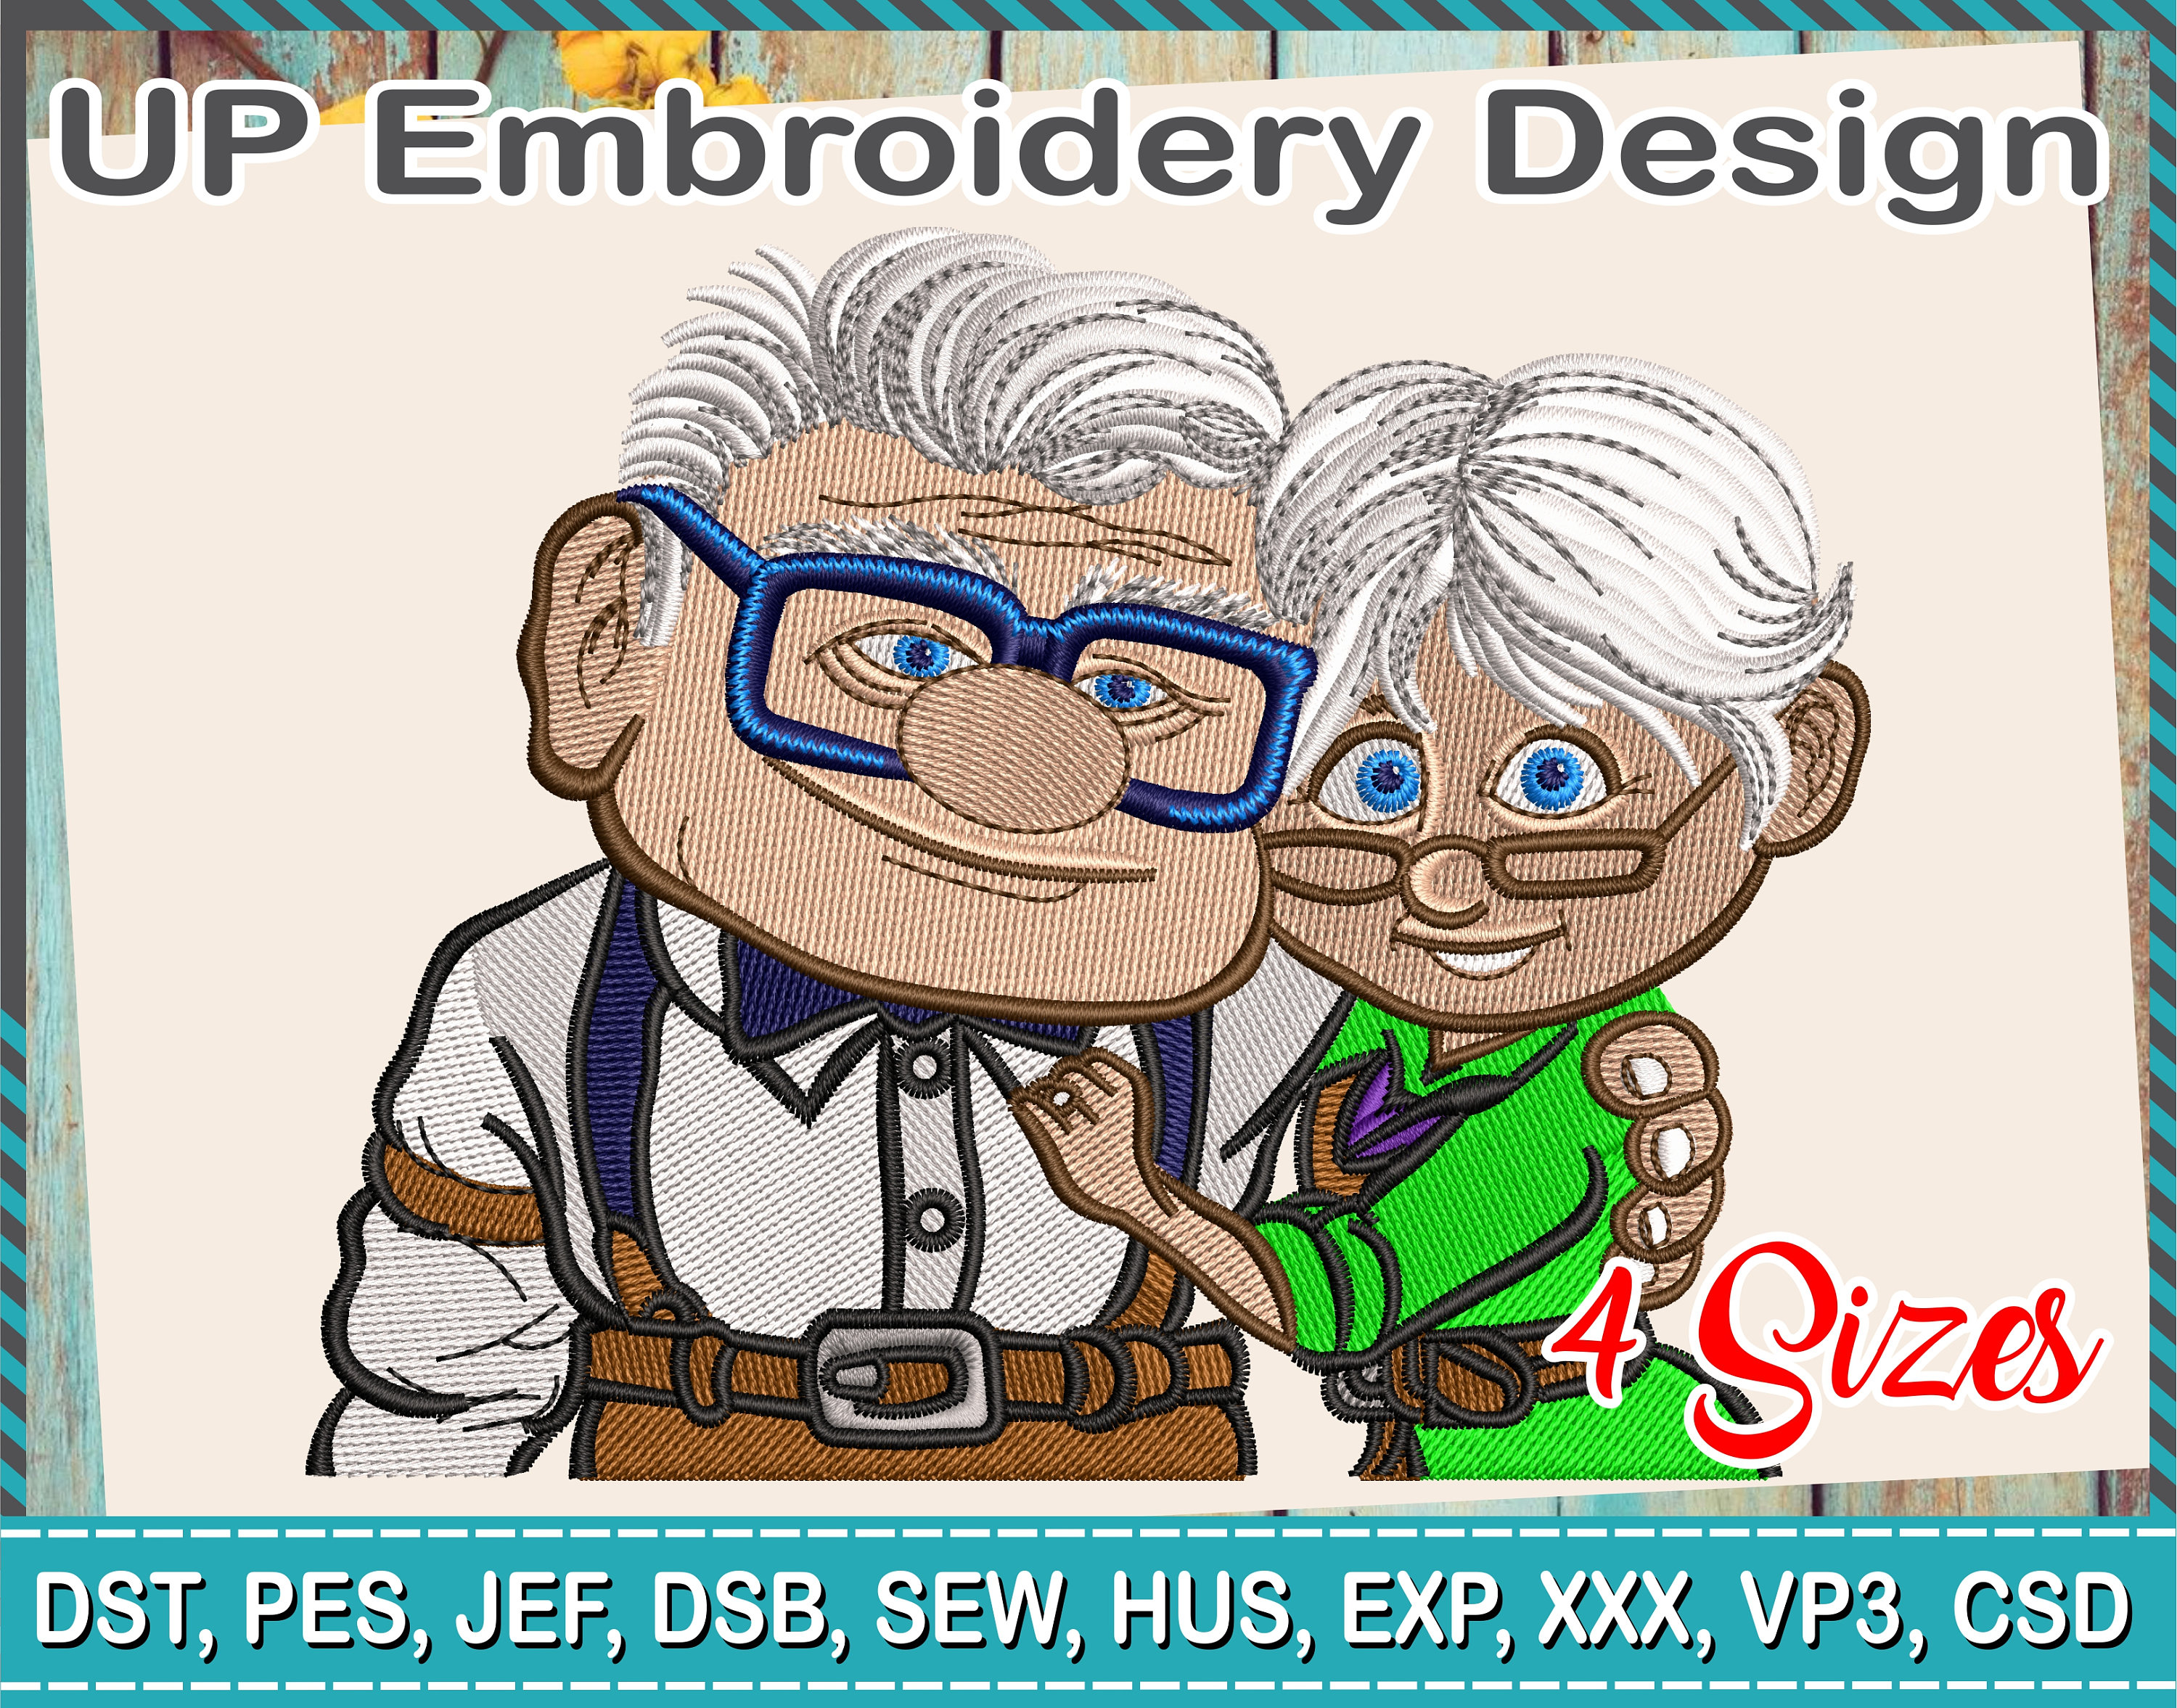 Embroidery Designs, Couple of Grandparents From the Movie UP, a High  Adventure, Carl Fredricksen and Ellie Fredricksen, Grandparents Anniversary  -  Norway